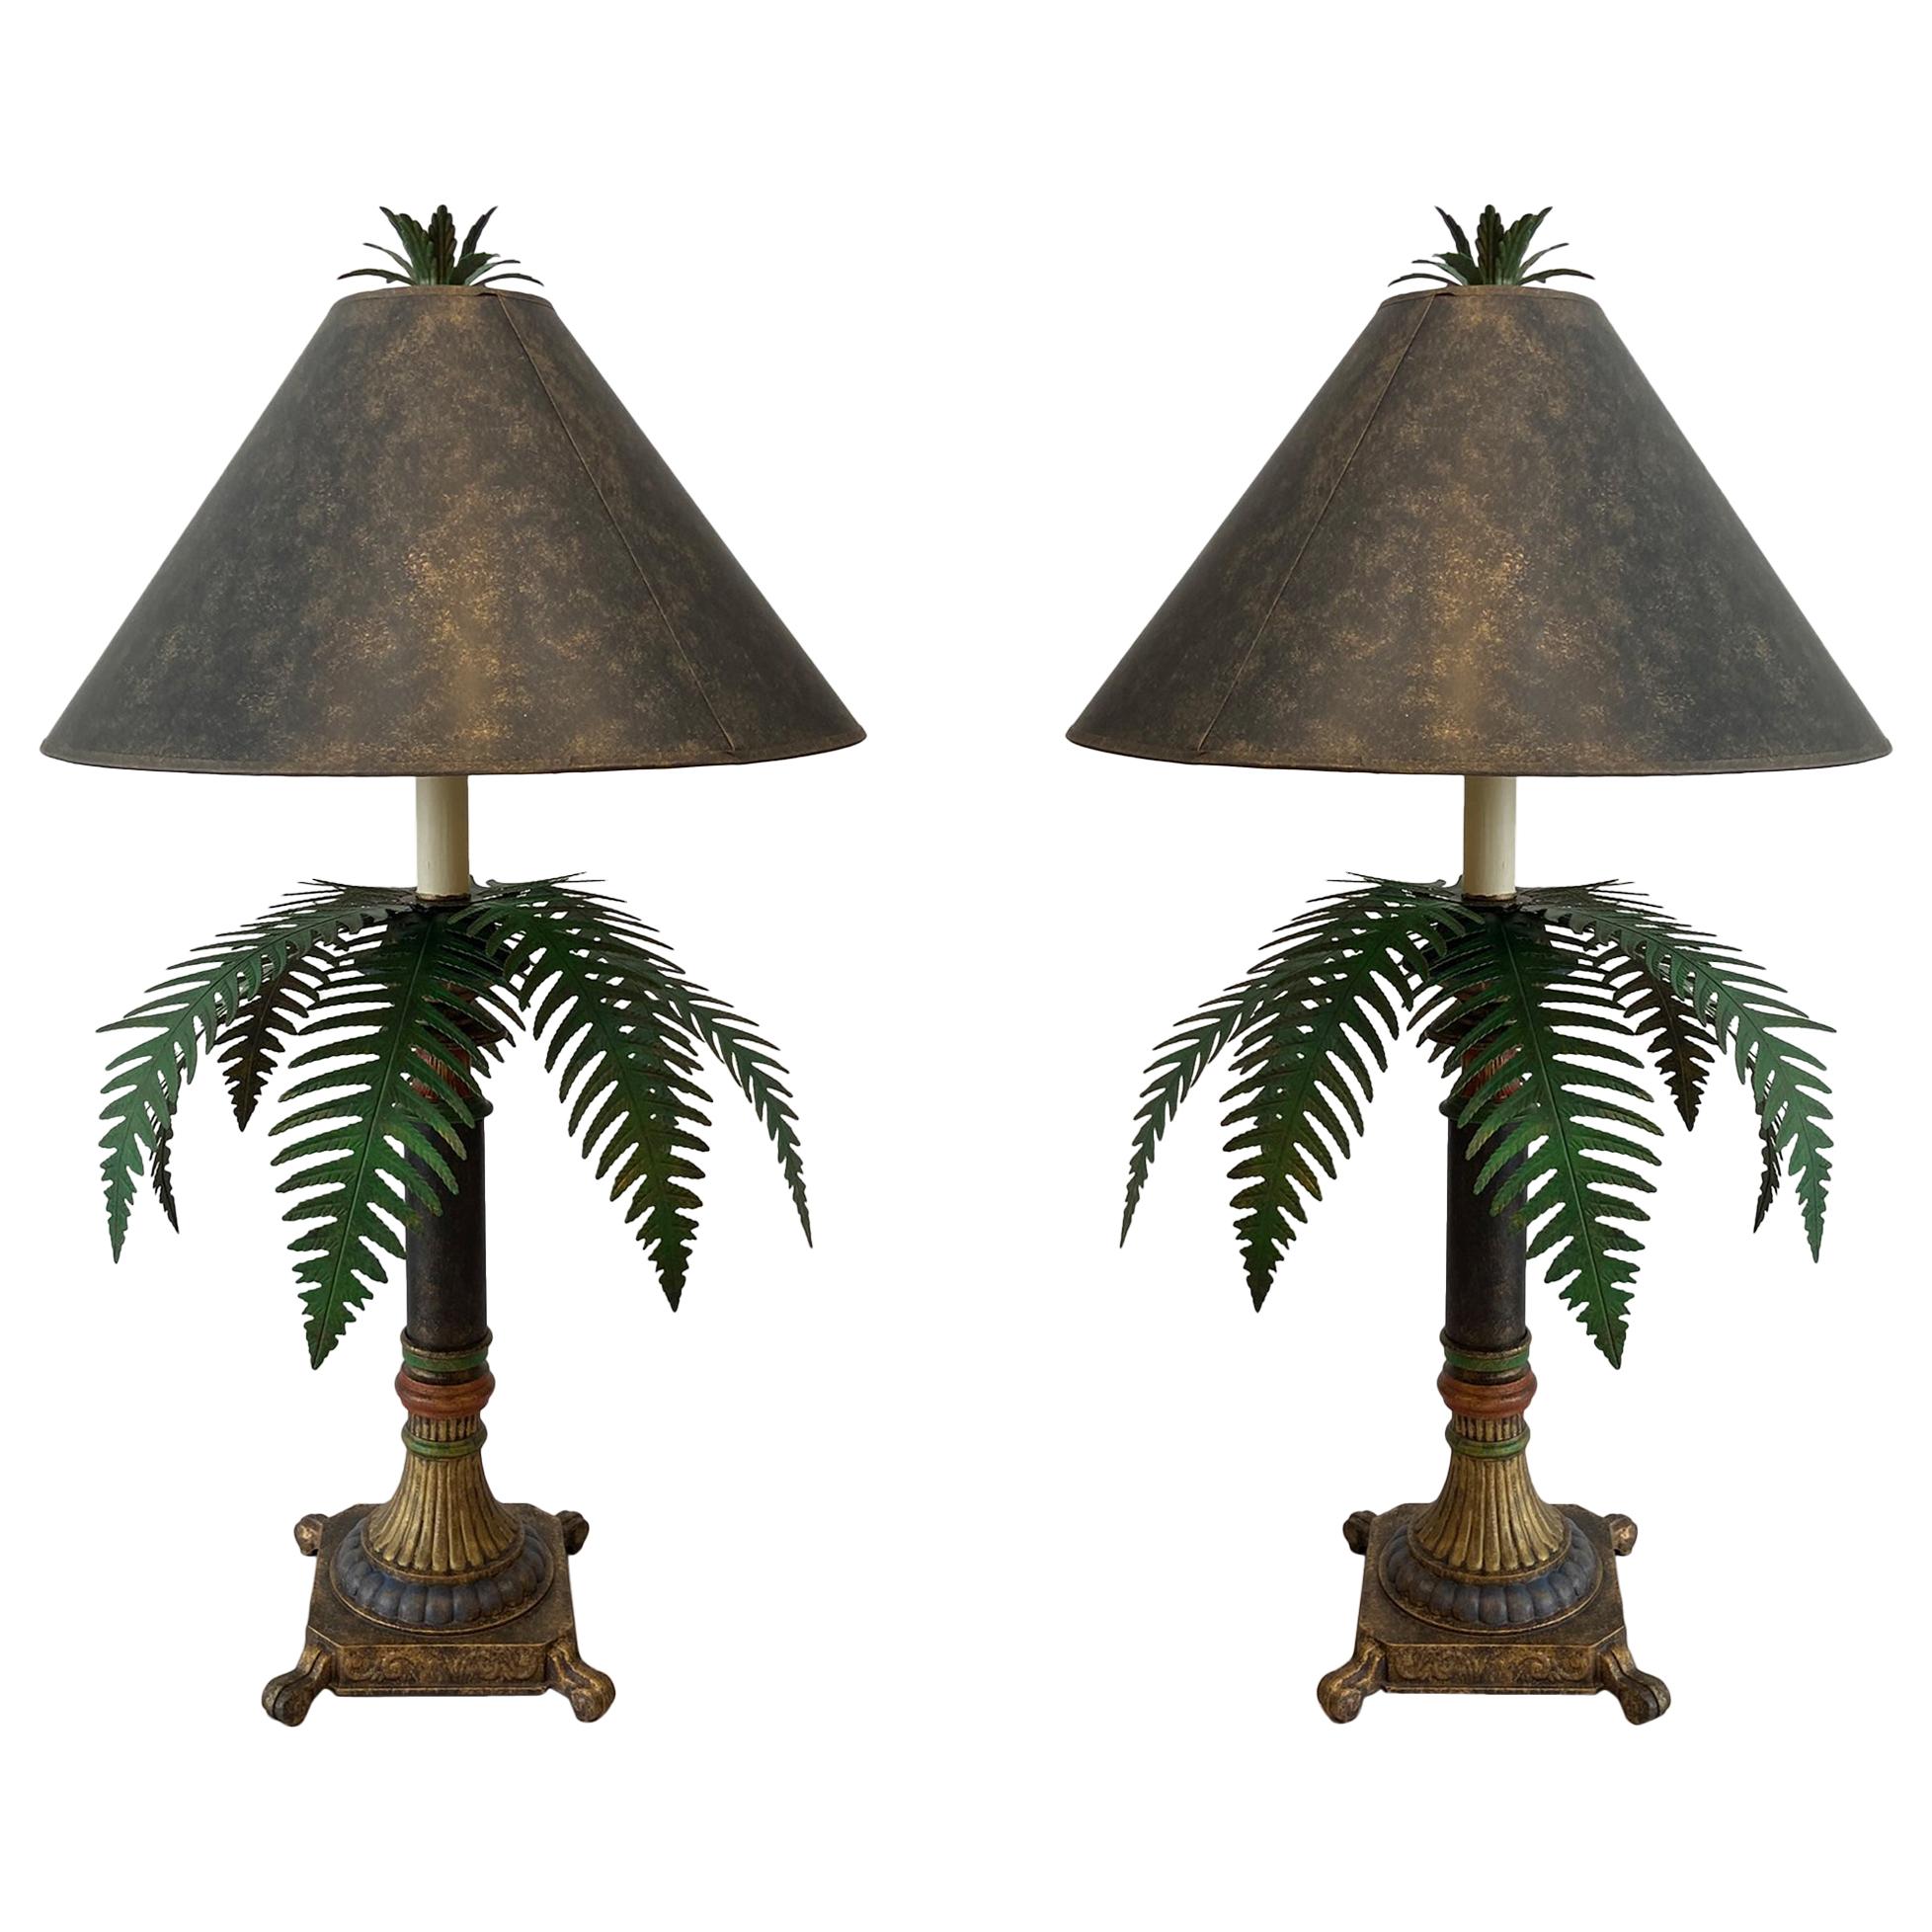 Pair of Tole Ware Palm Tree Table Lamps